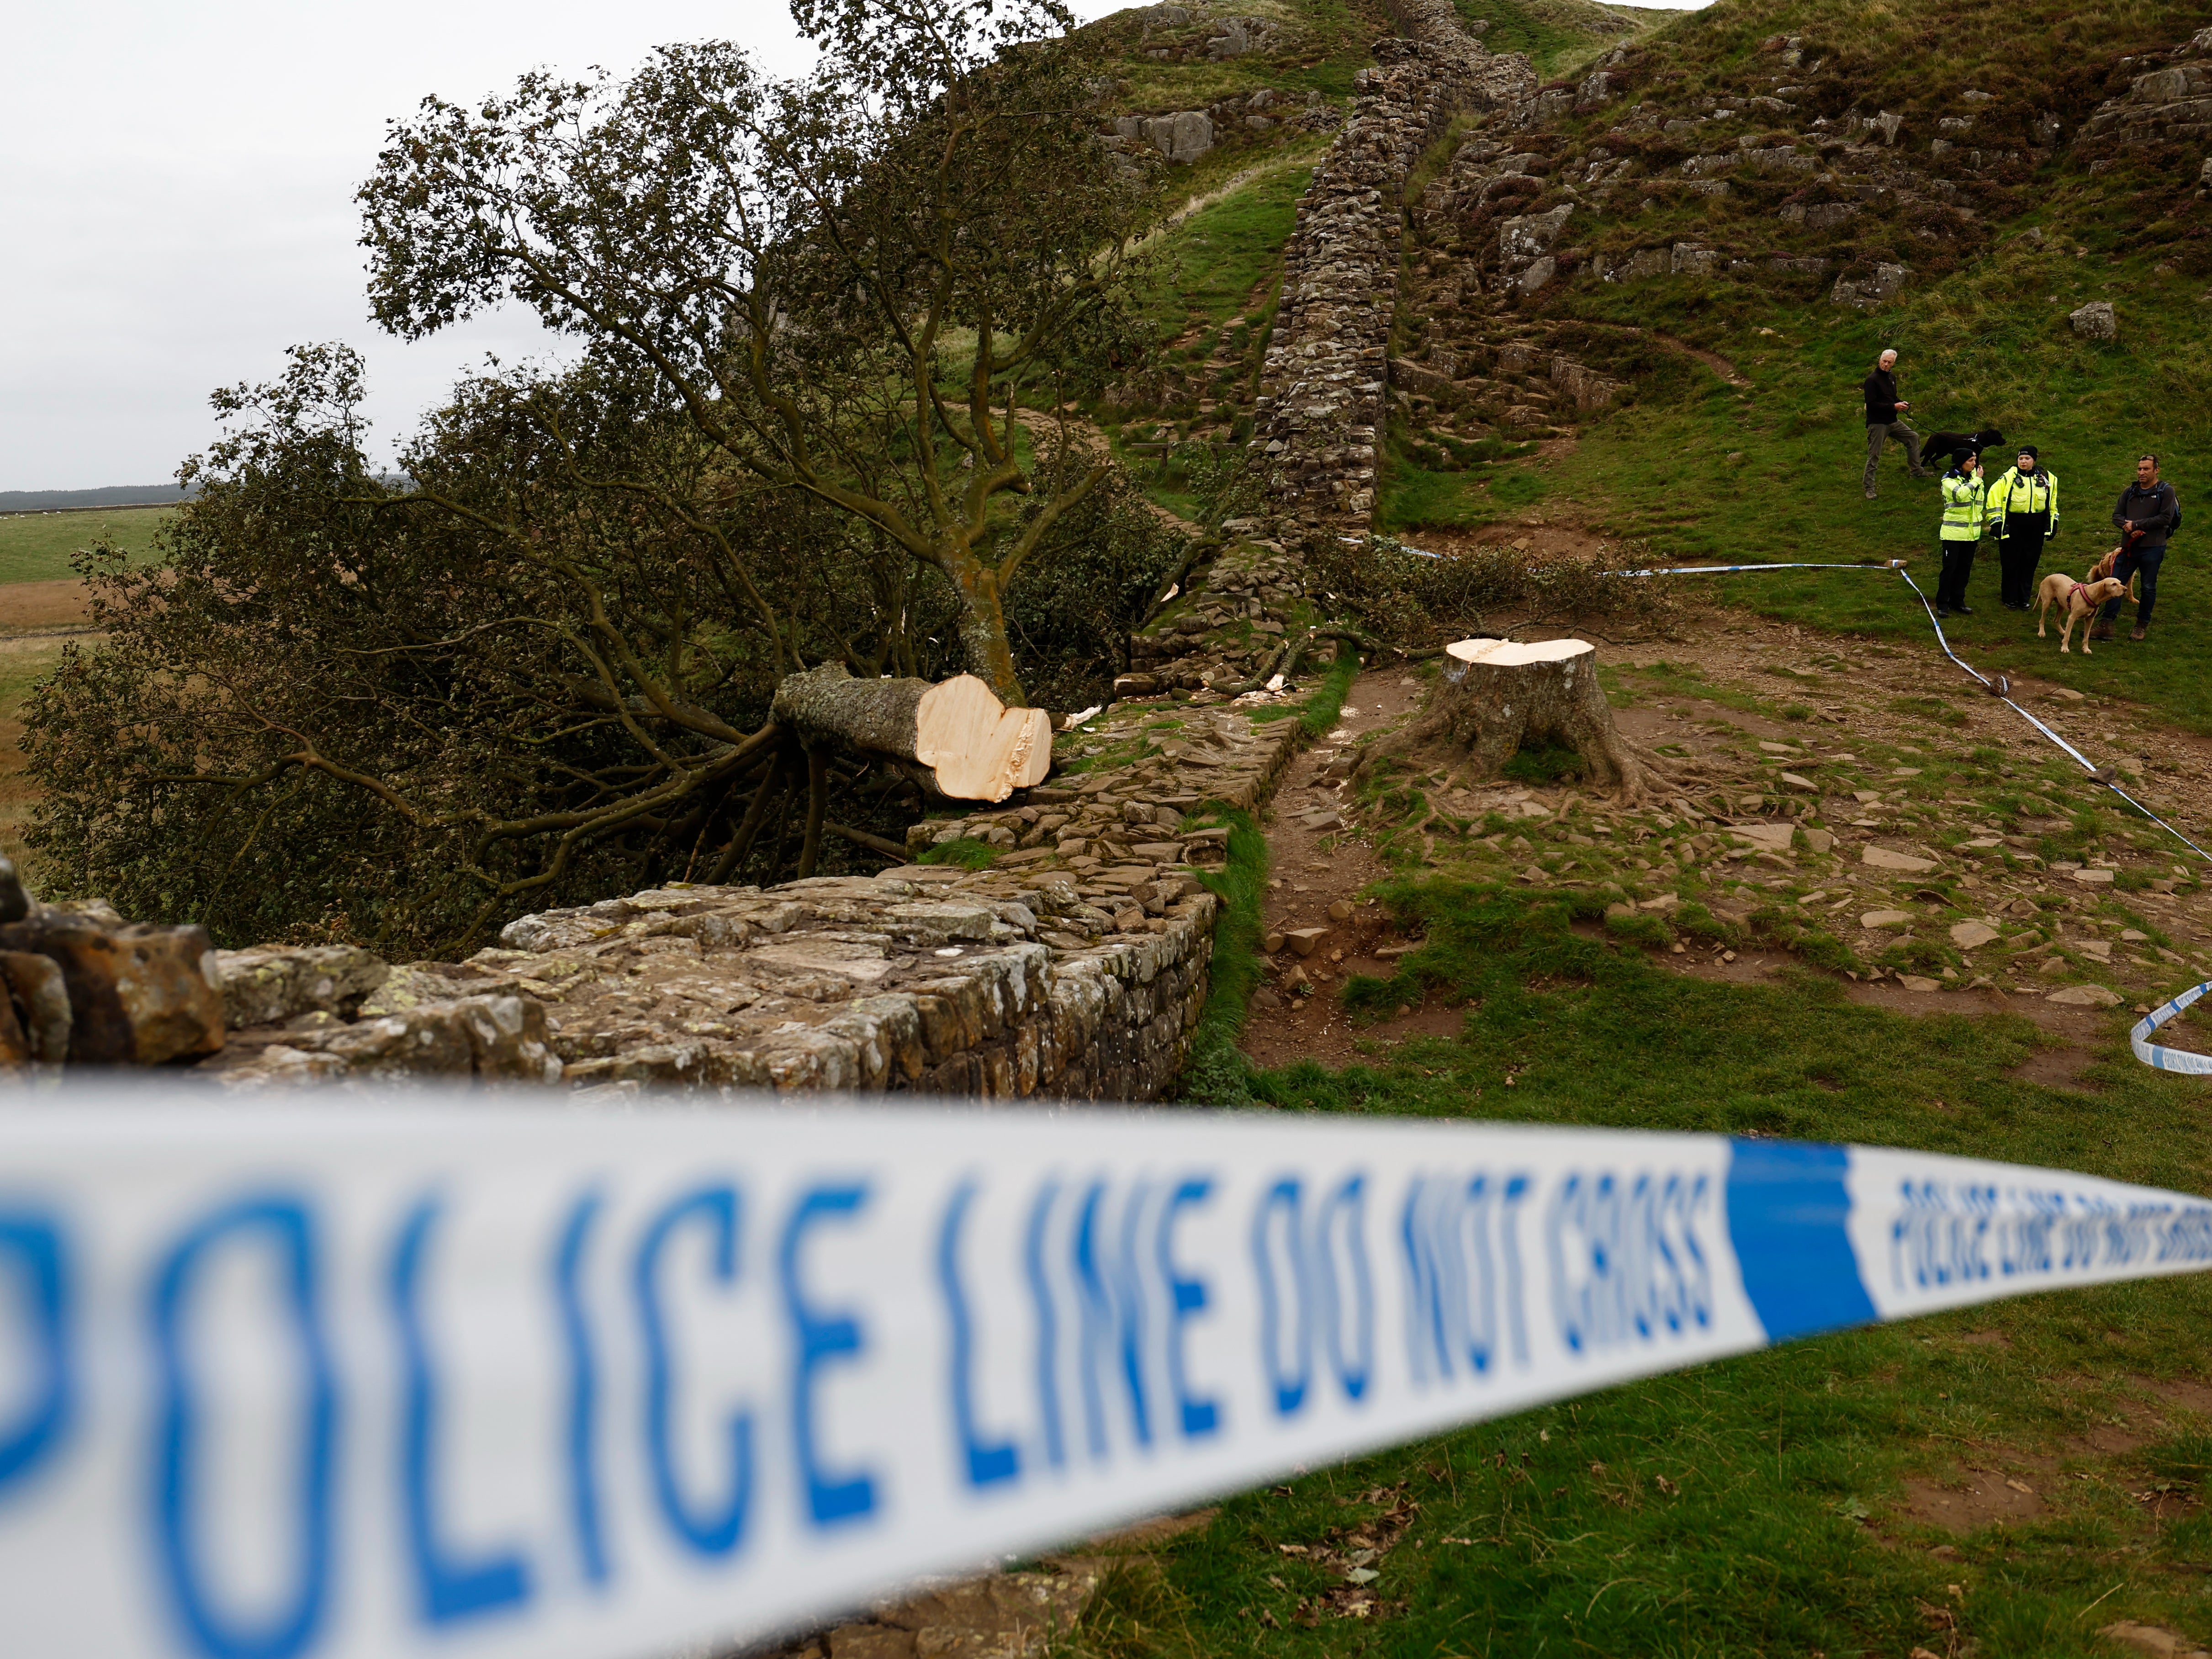 Police stand beside the cordoned-off area, where the ‘Sycamore Gap’ tree on Hadrian’s Wall now lies on the ground